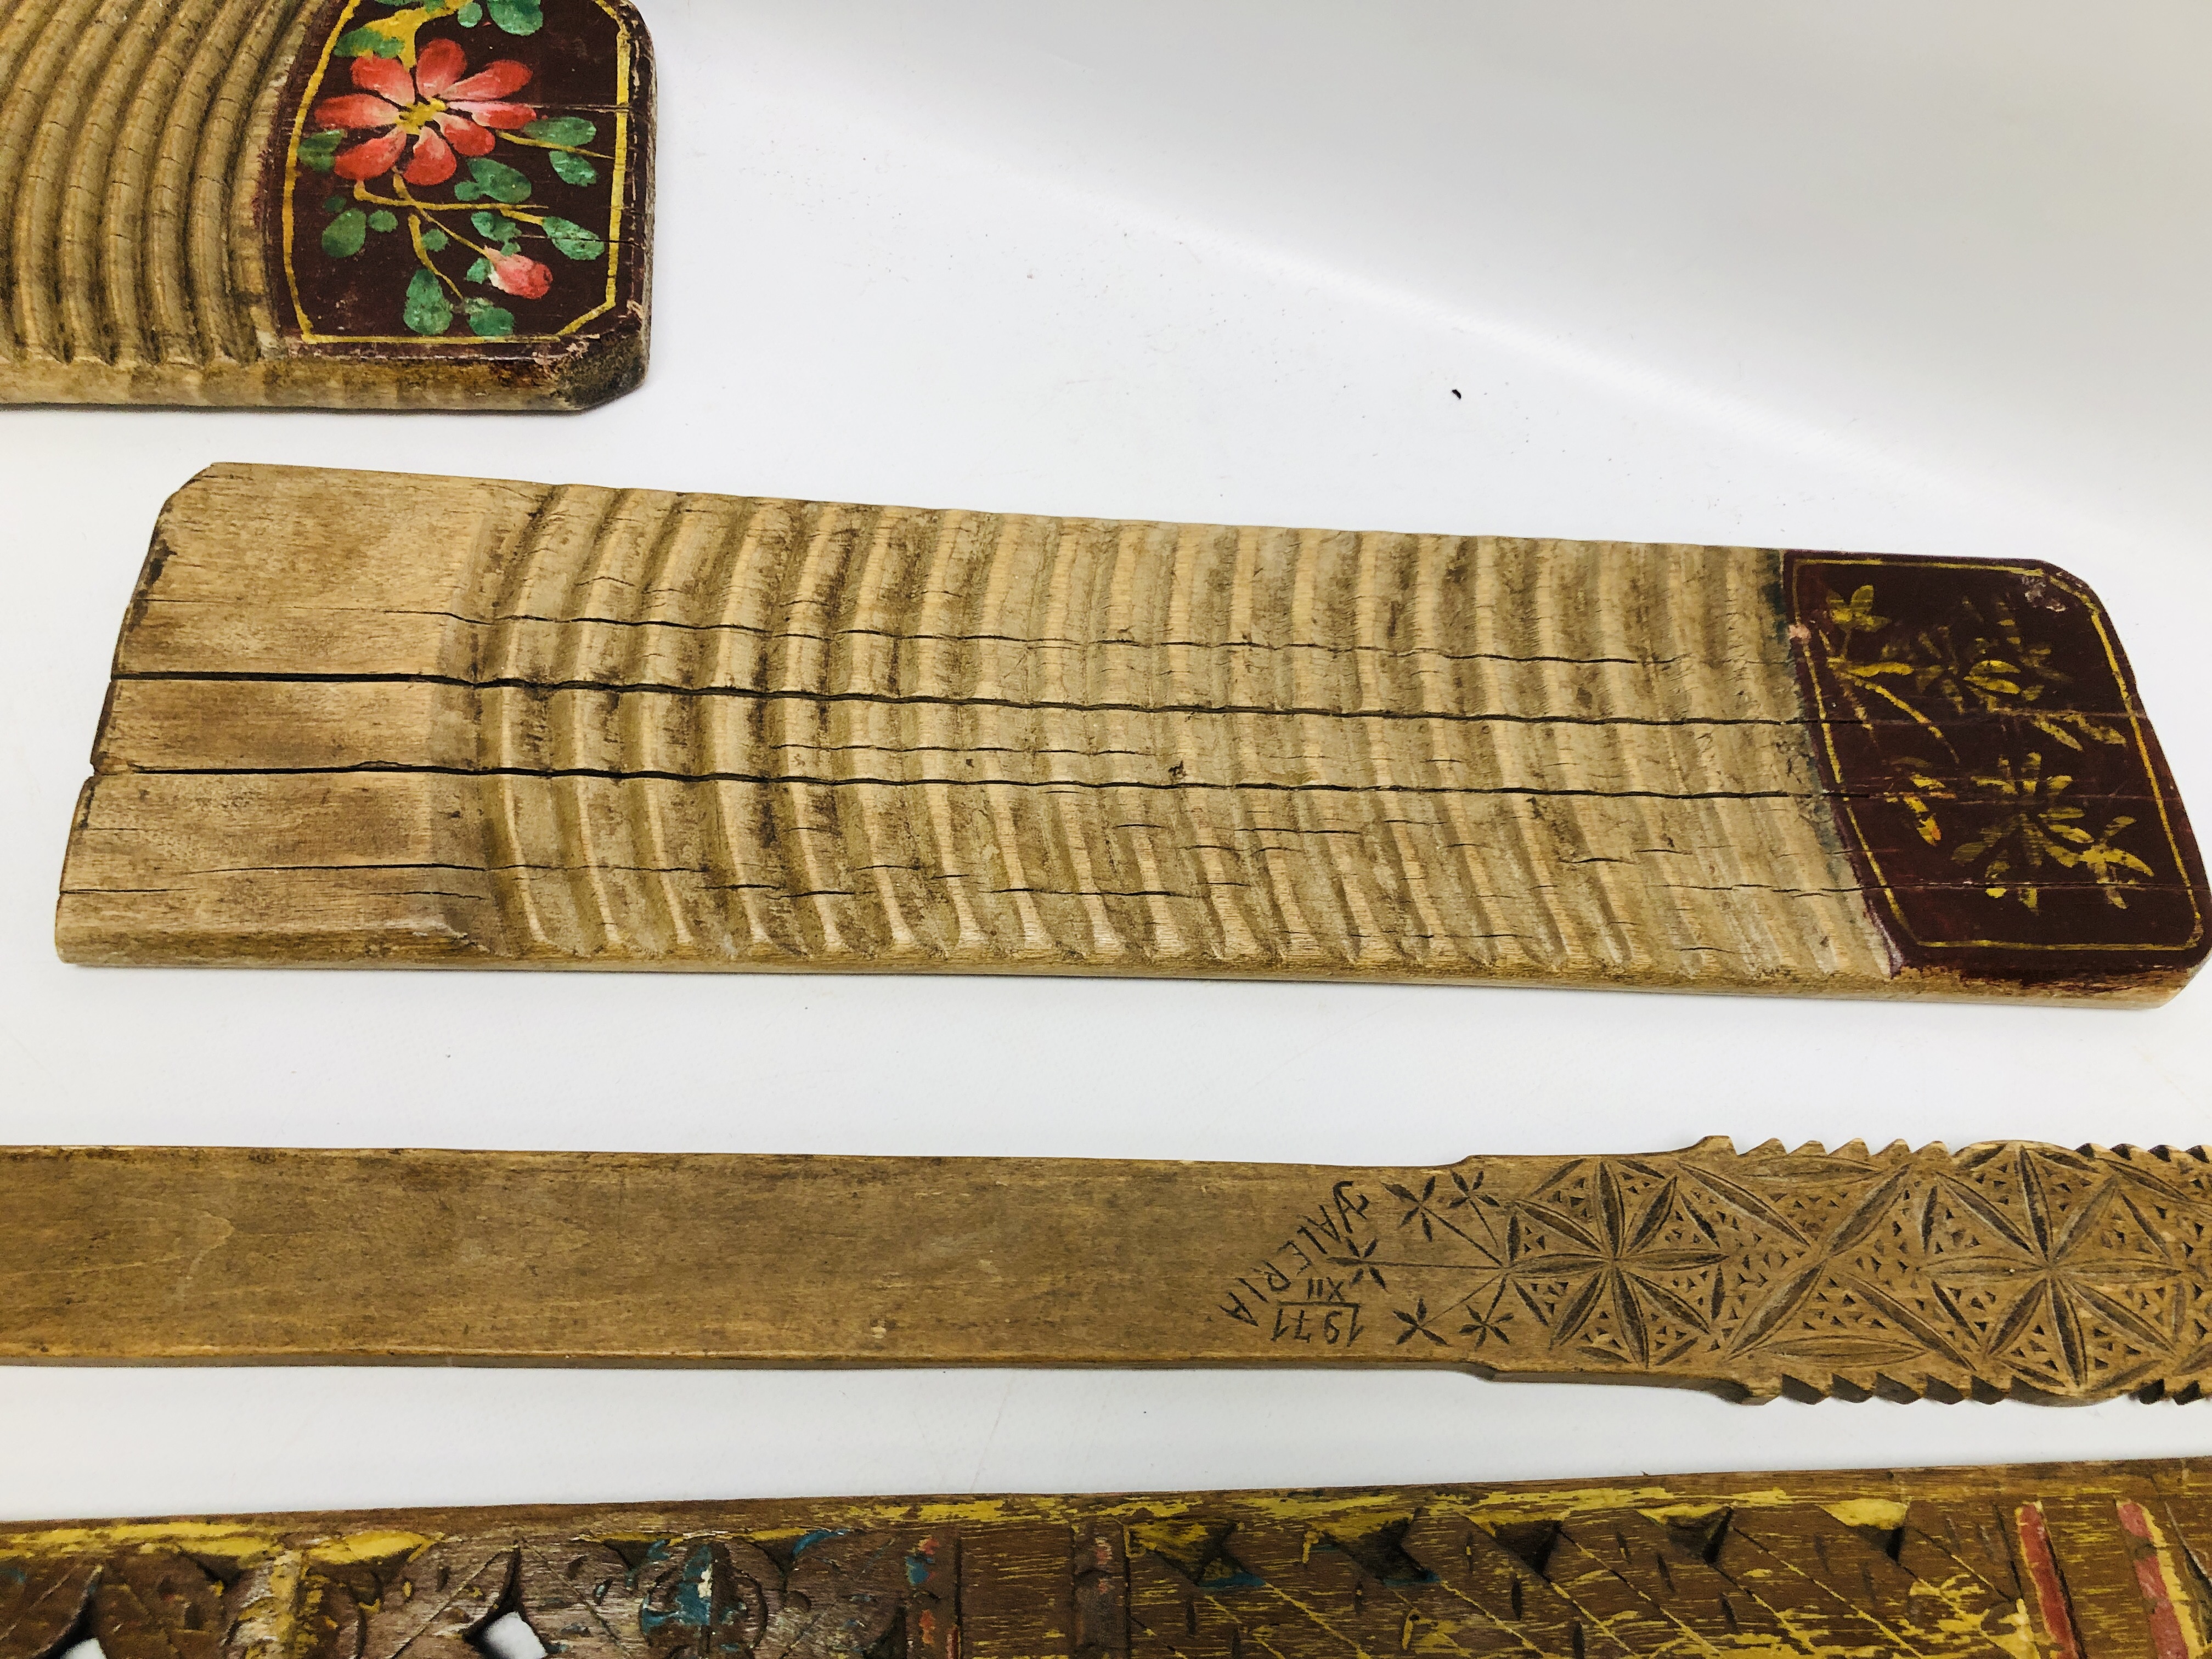 A PAIR OF CARVED HARDWOOD PIERCED BOARDS, WITH PAINTED FLOWERS AND LEAVES HEIGHT 88.5CM. - Image 6 of 10